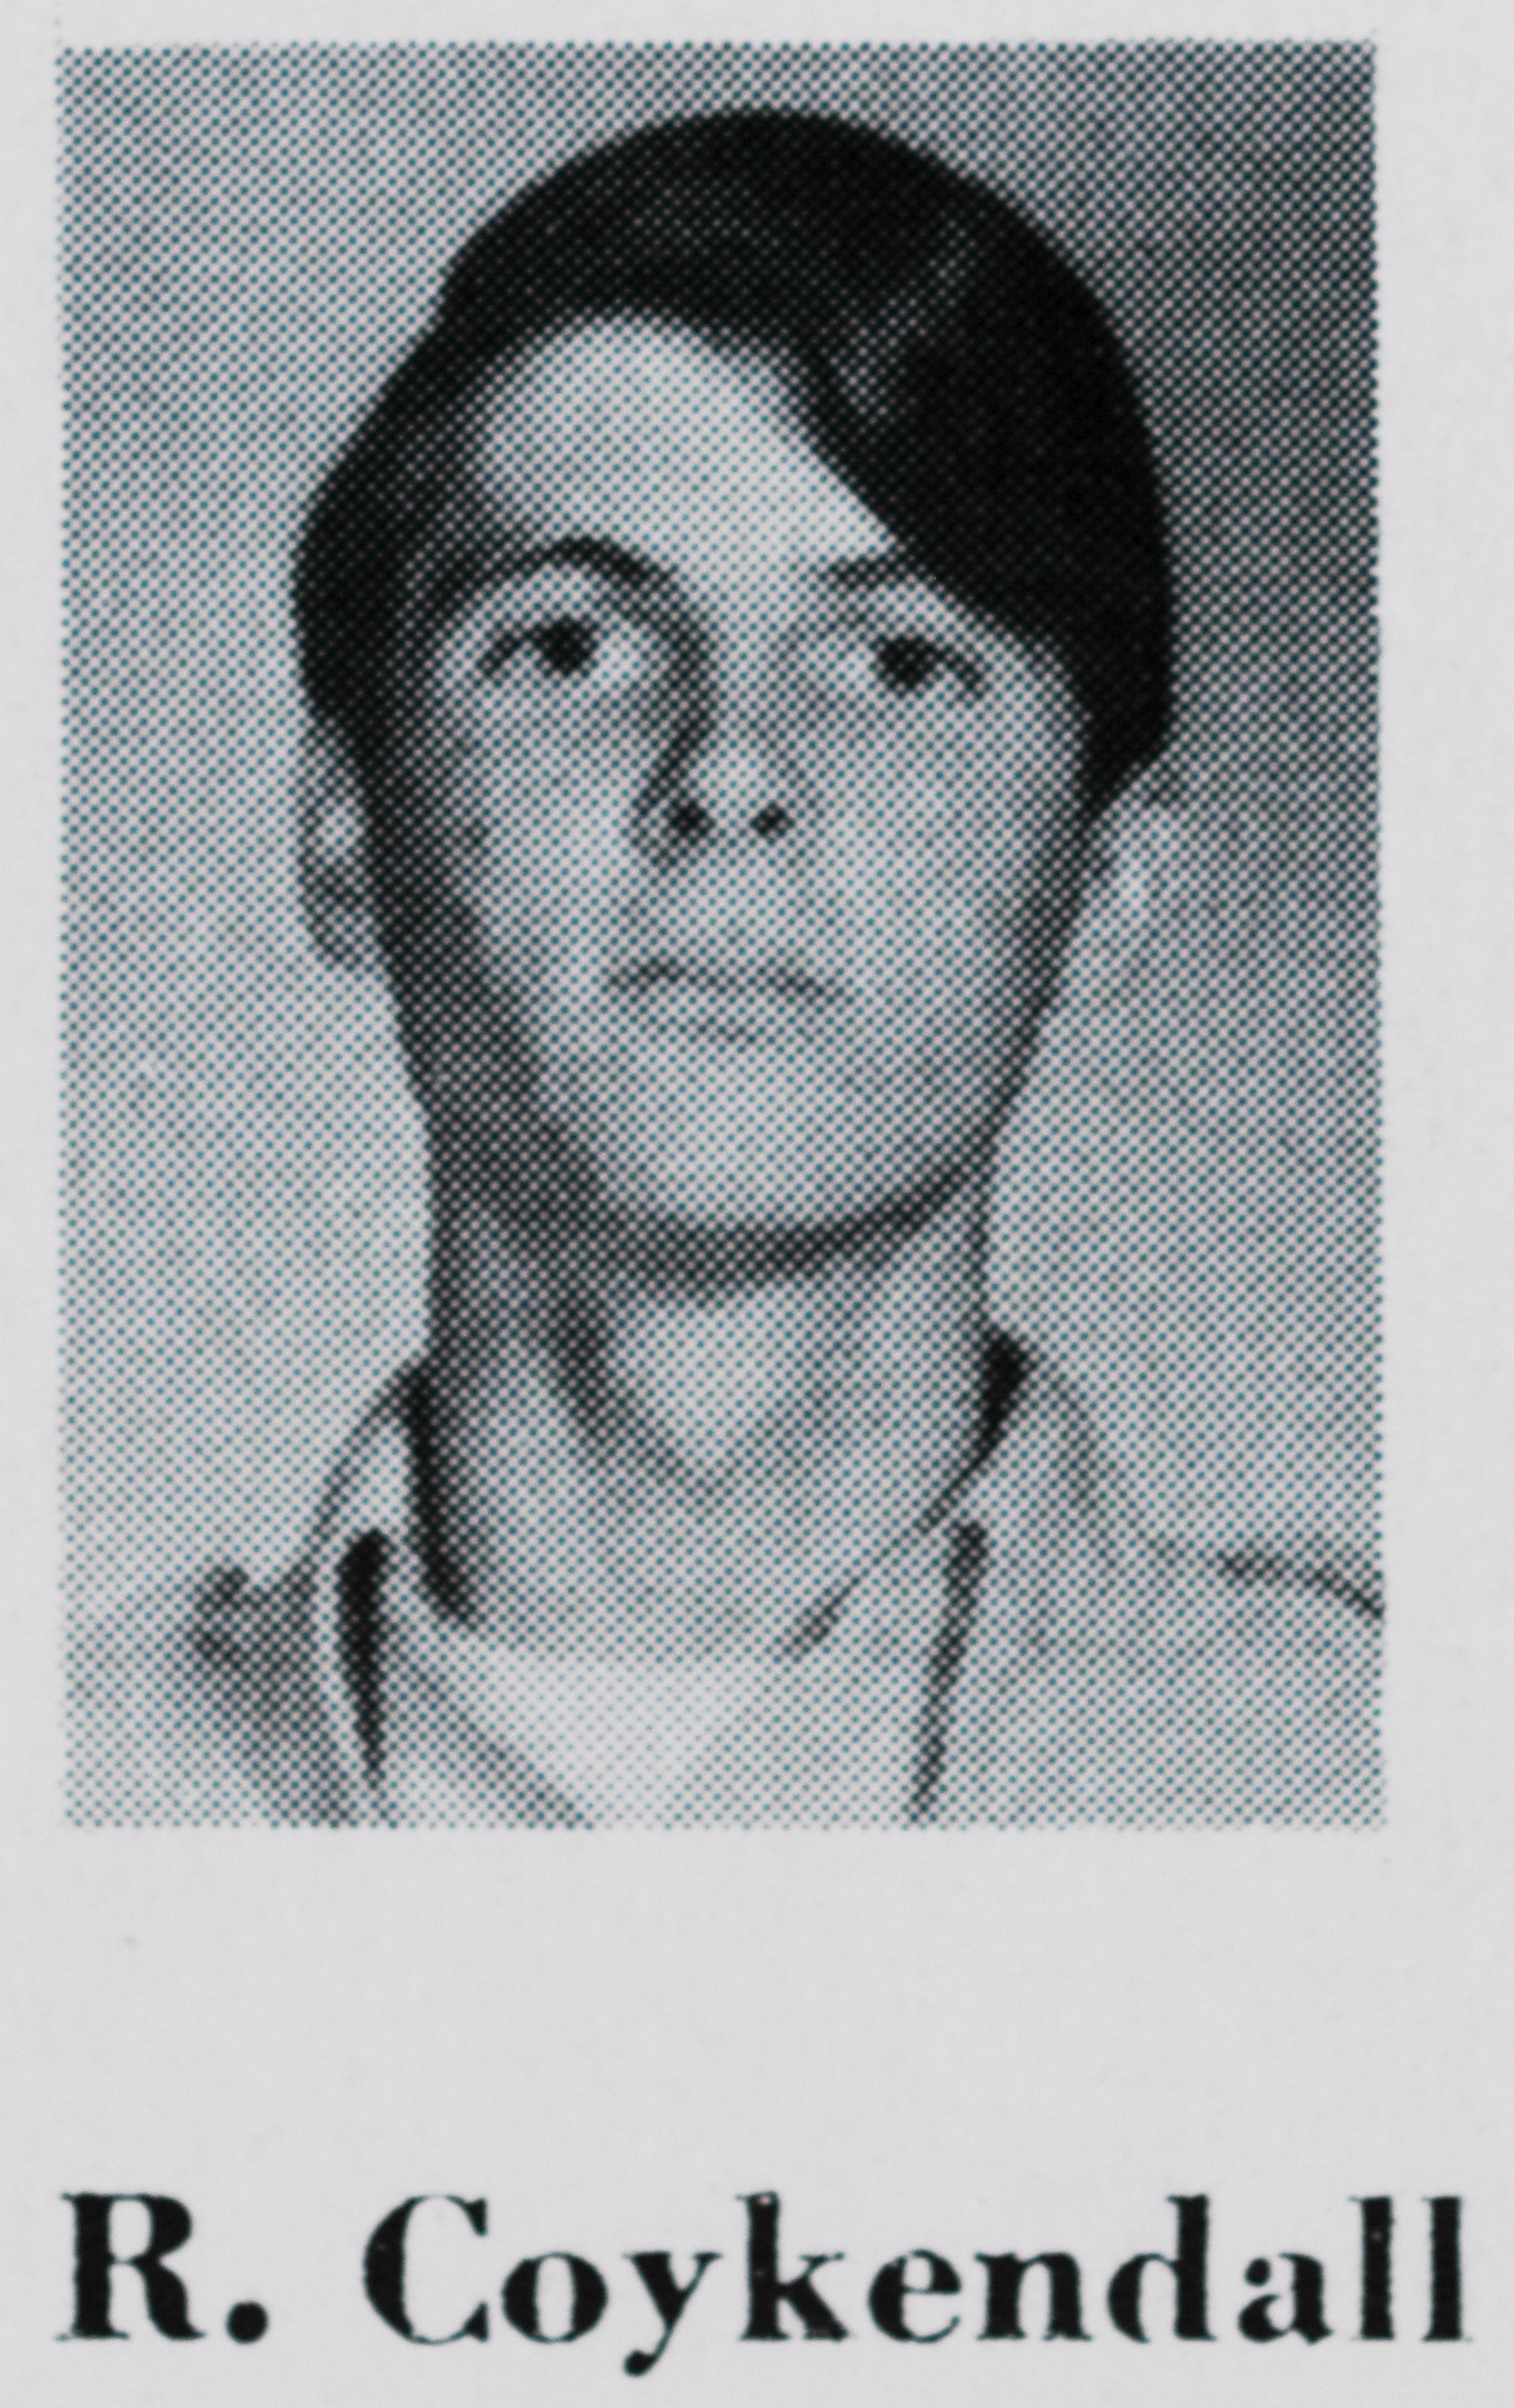 John "Roski" Coykendall (from 1967 yearbook)